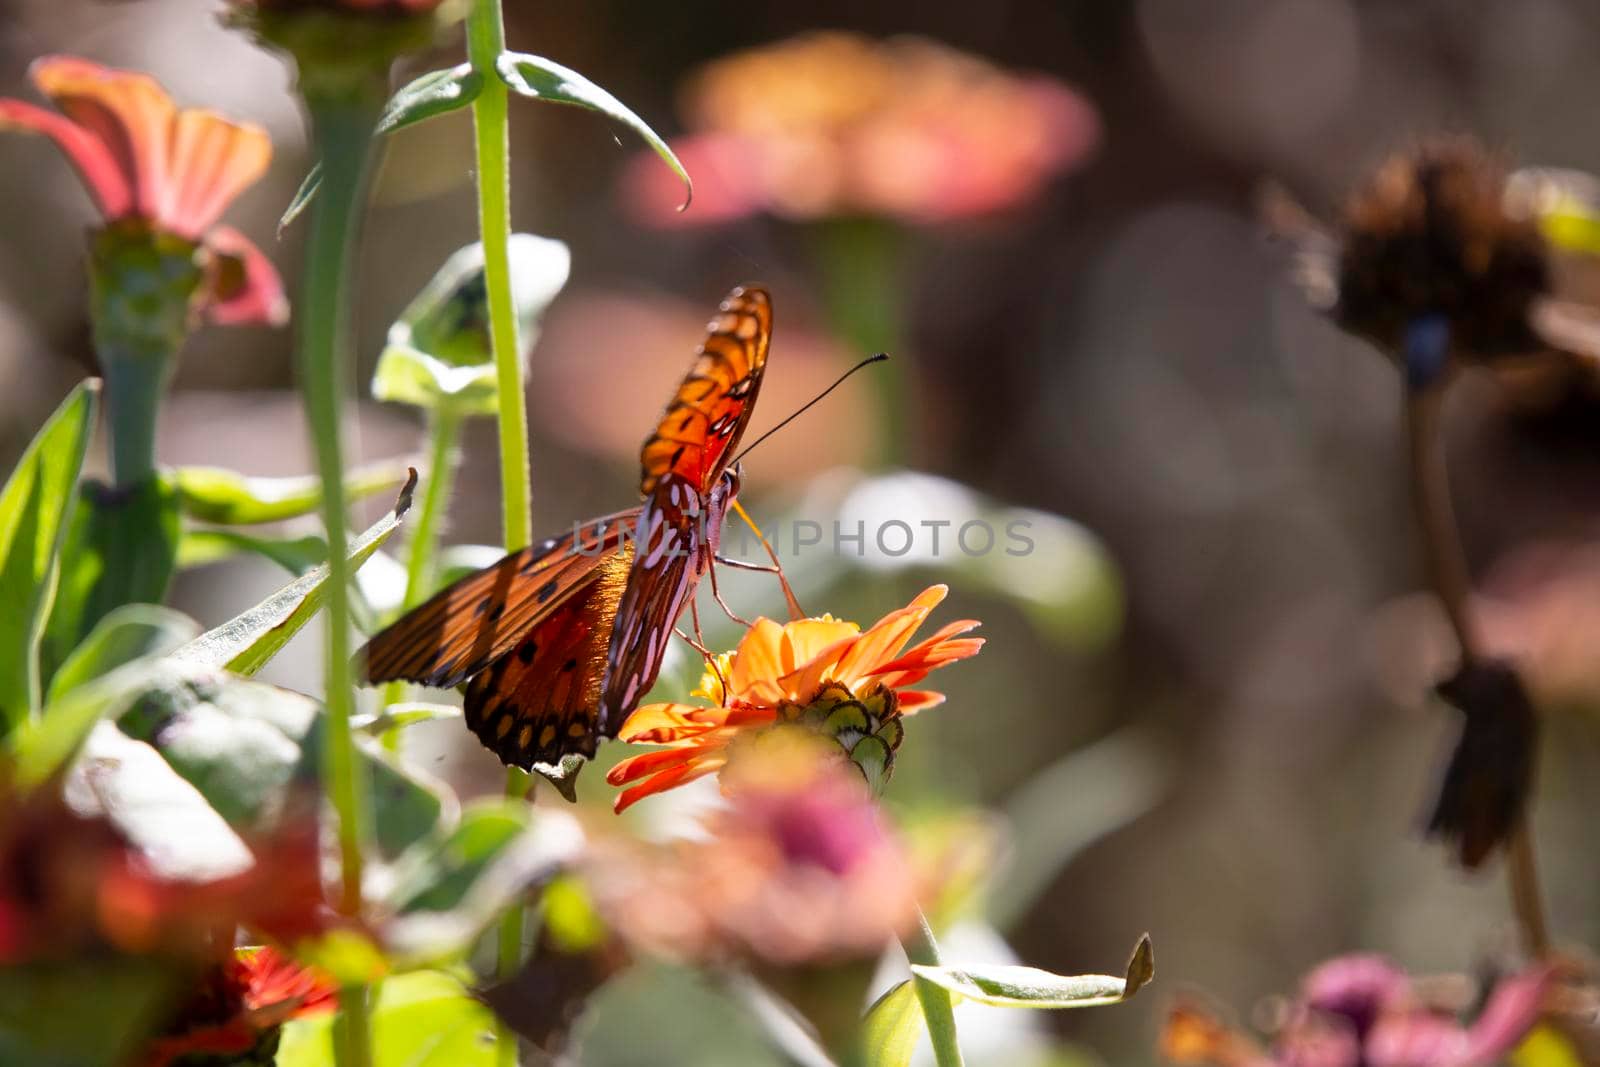 Gulf fritillary butterfly (Agraulis vanillae) on an orange zinnia flower, with copy space on the right